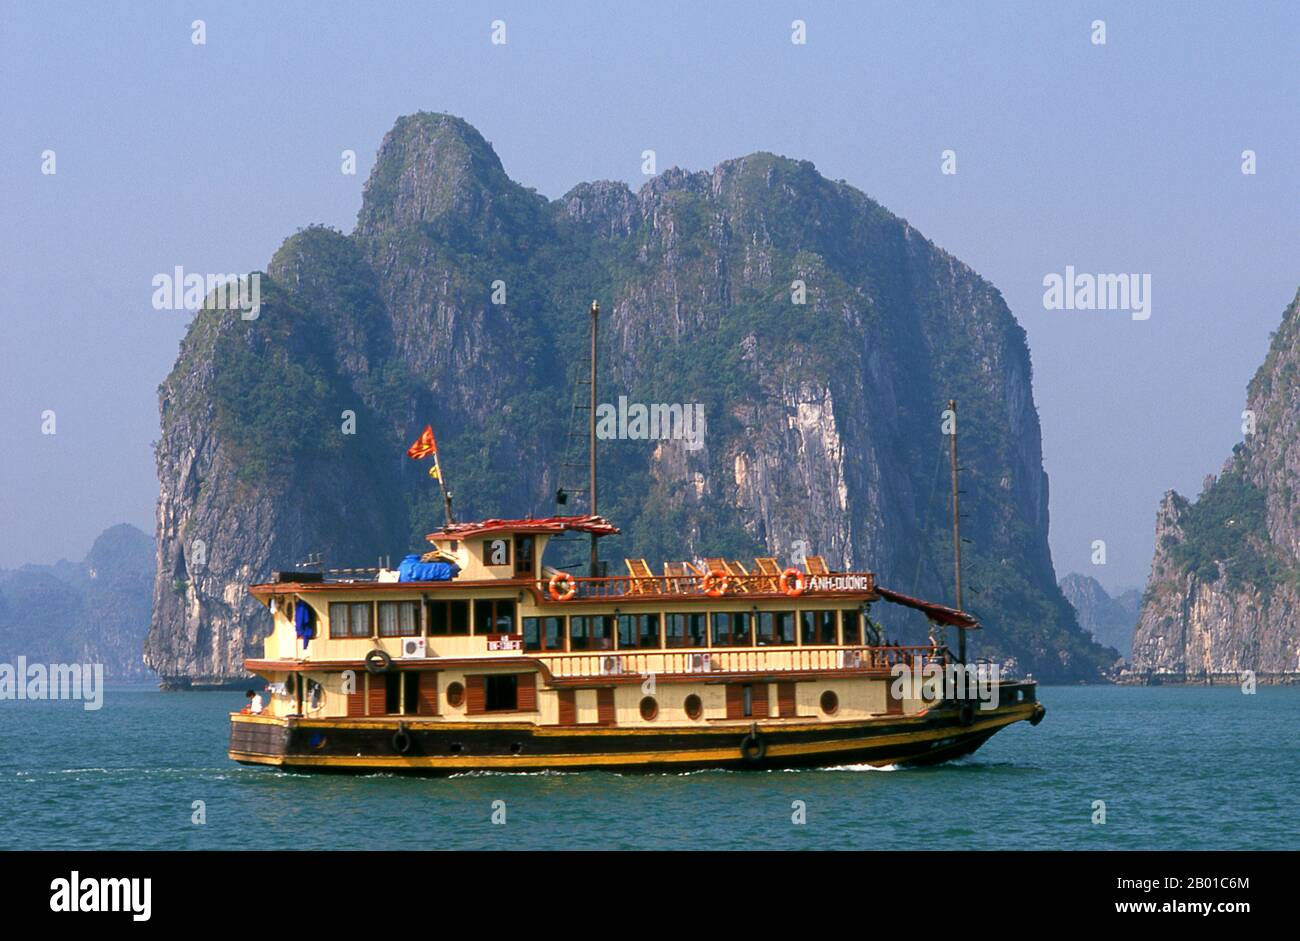 Vietnam: A tour boat in Halong Bay, Quang Ninh Province.  In Vietnamese ha long means ‘descending dragon’, and legend has it that Halong Bay was formed by a gigantic dragon which plunged into the Gulf of Tonkin, creating thousands of limestone outcrops by the lashing of its tail. Geologists tend to dismiss this theory, arguing that the myriad islands that dot Halong Bay and extend all the way north to the Chinese frontier are the product of selective erosion of the seabed over millennia. Stock Photo